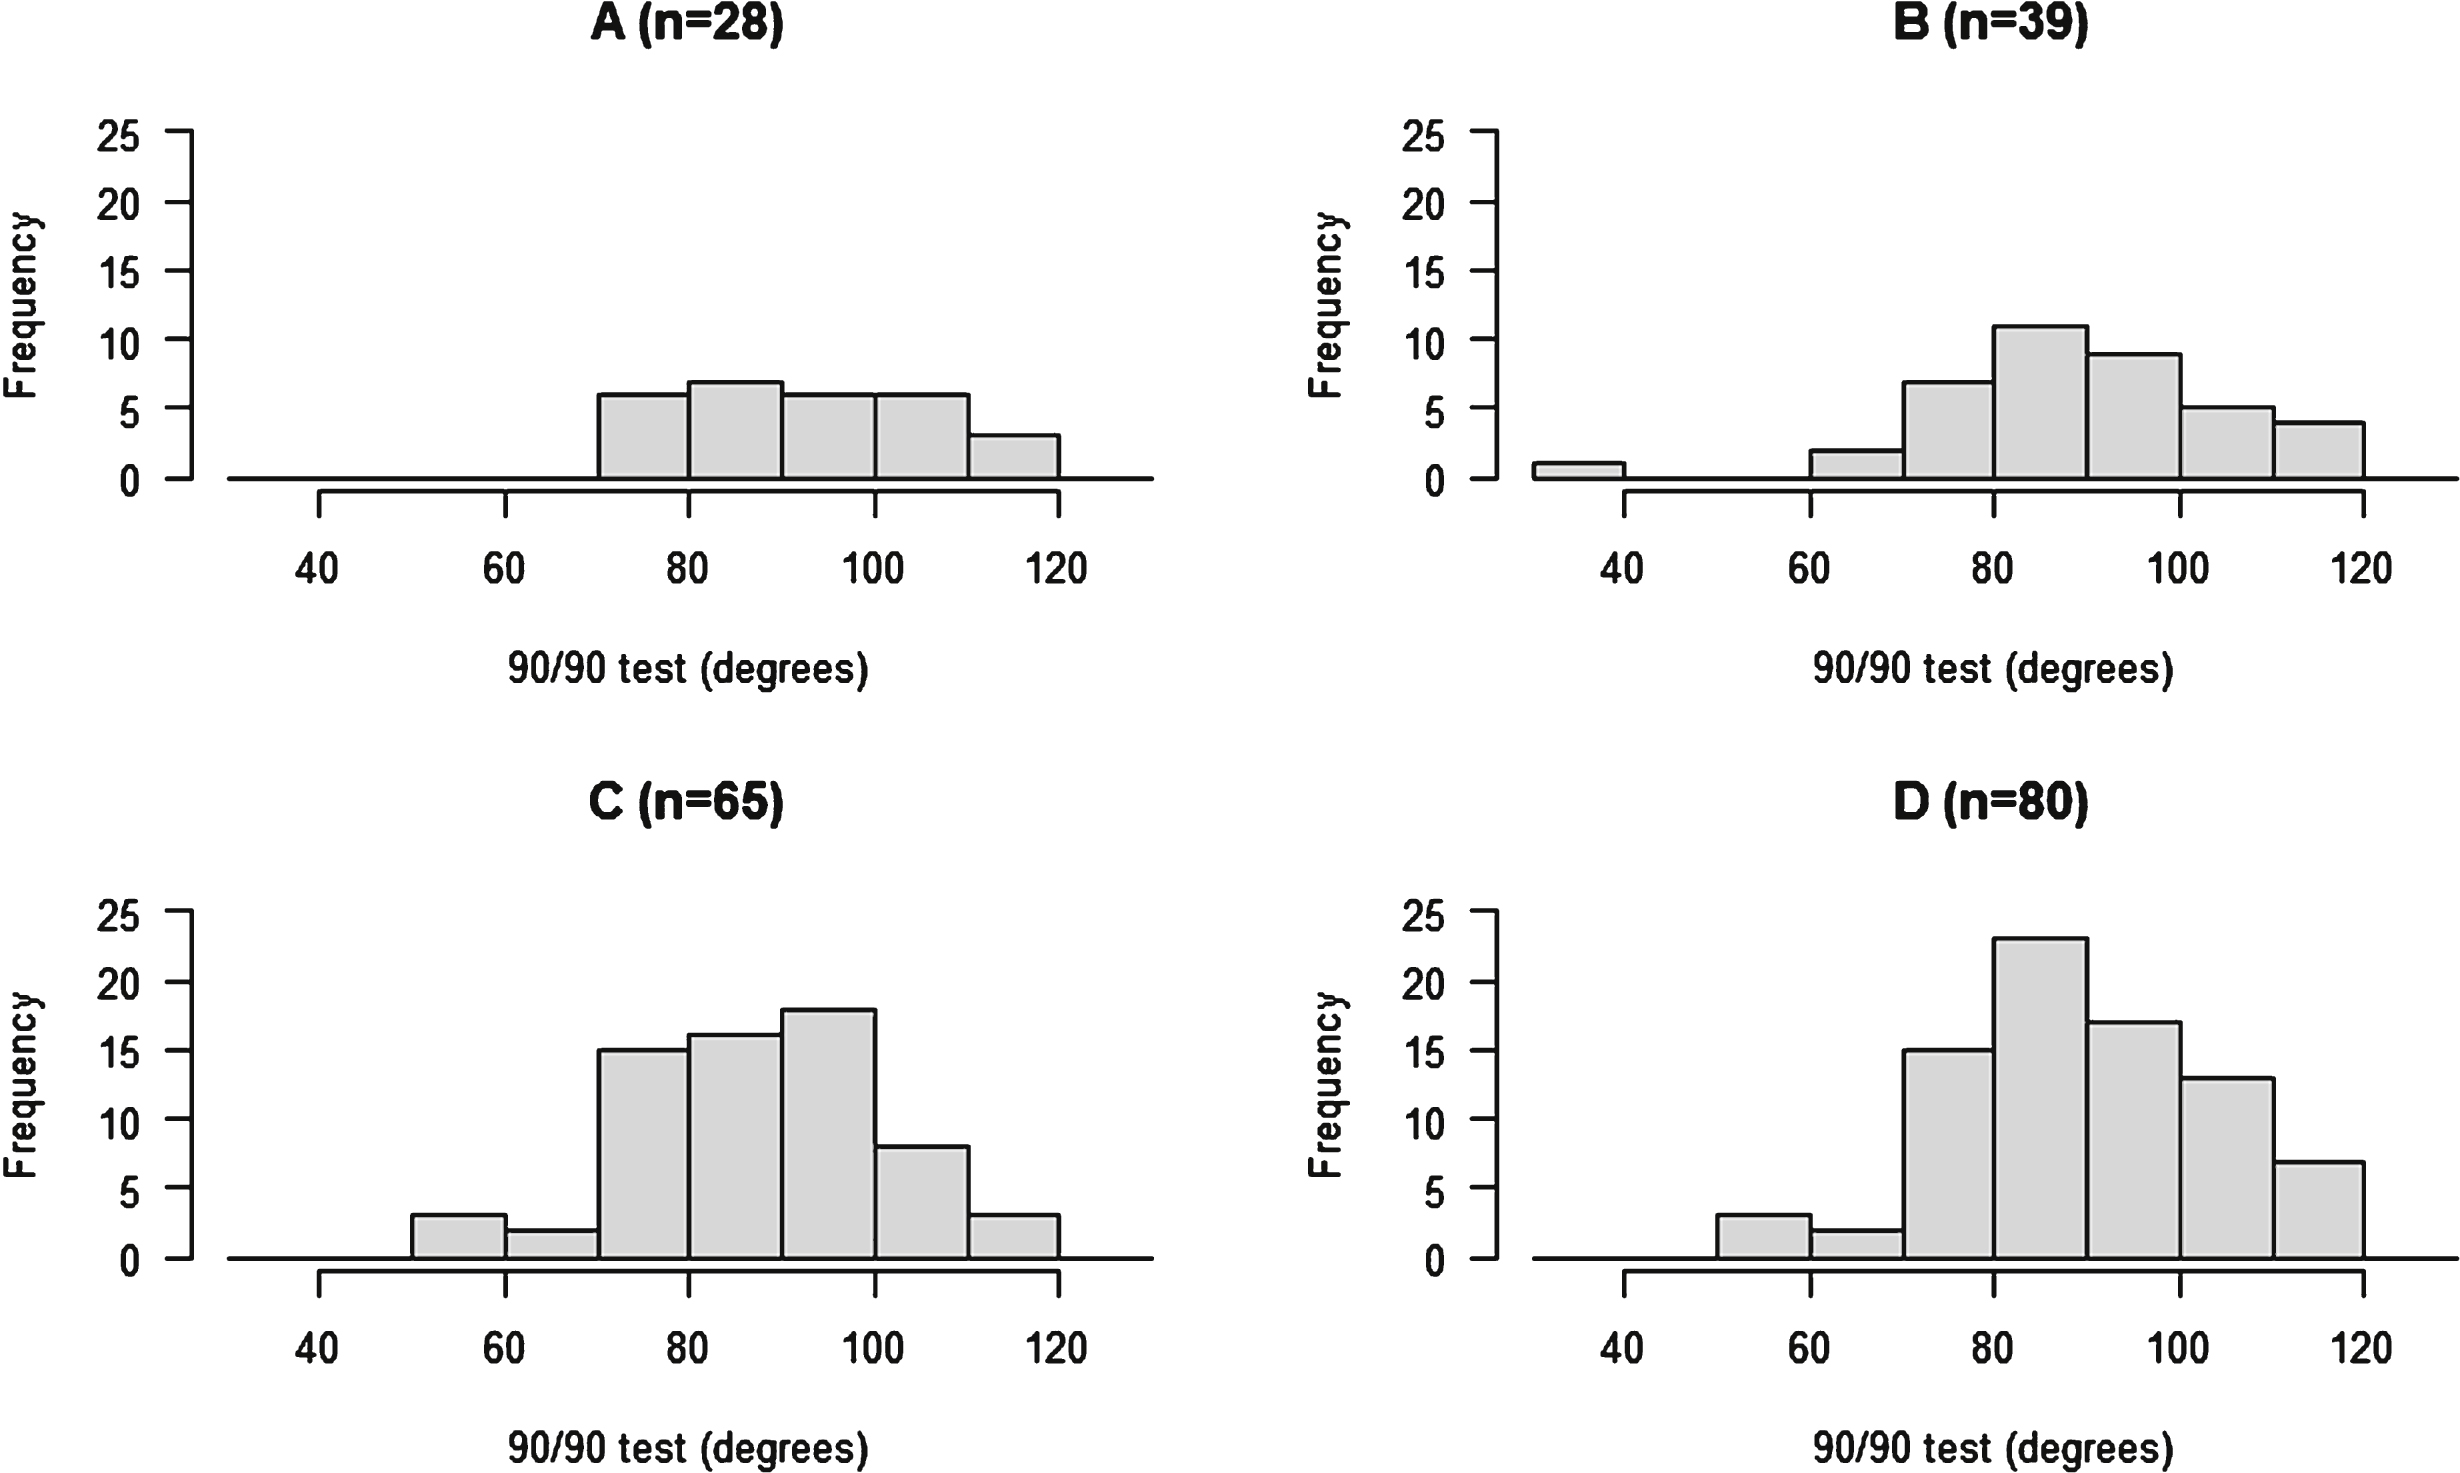 Histograms of four different samples of 90 90 test scores.